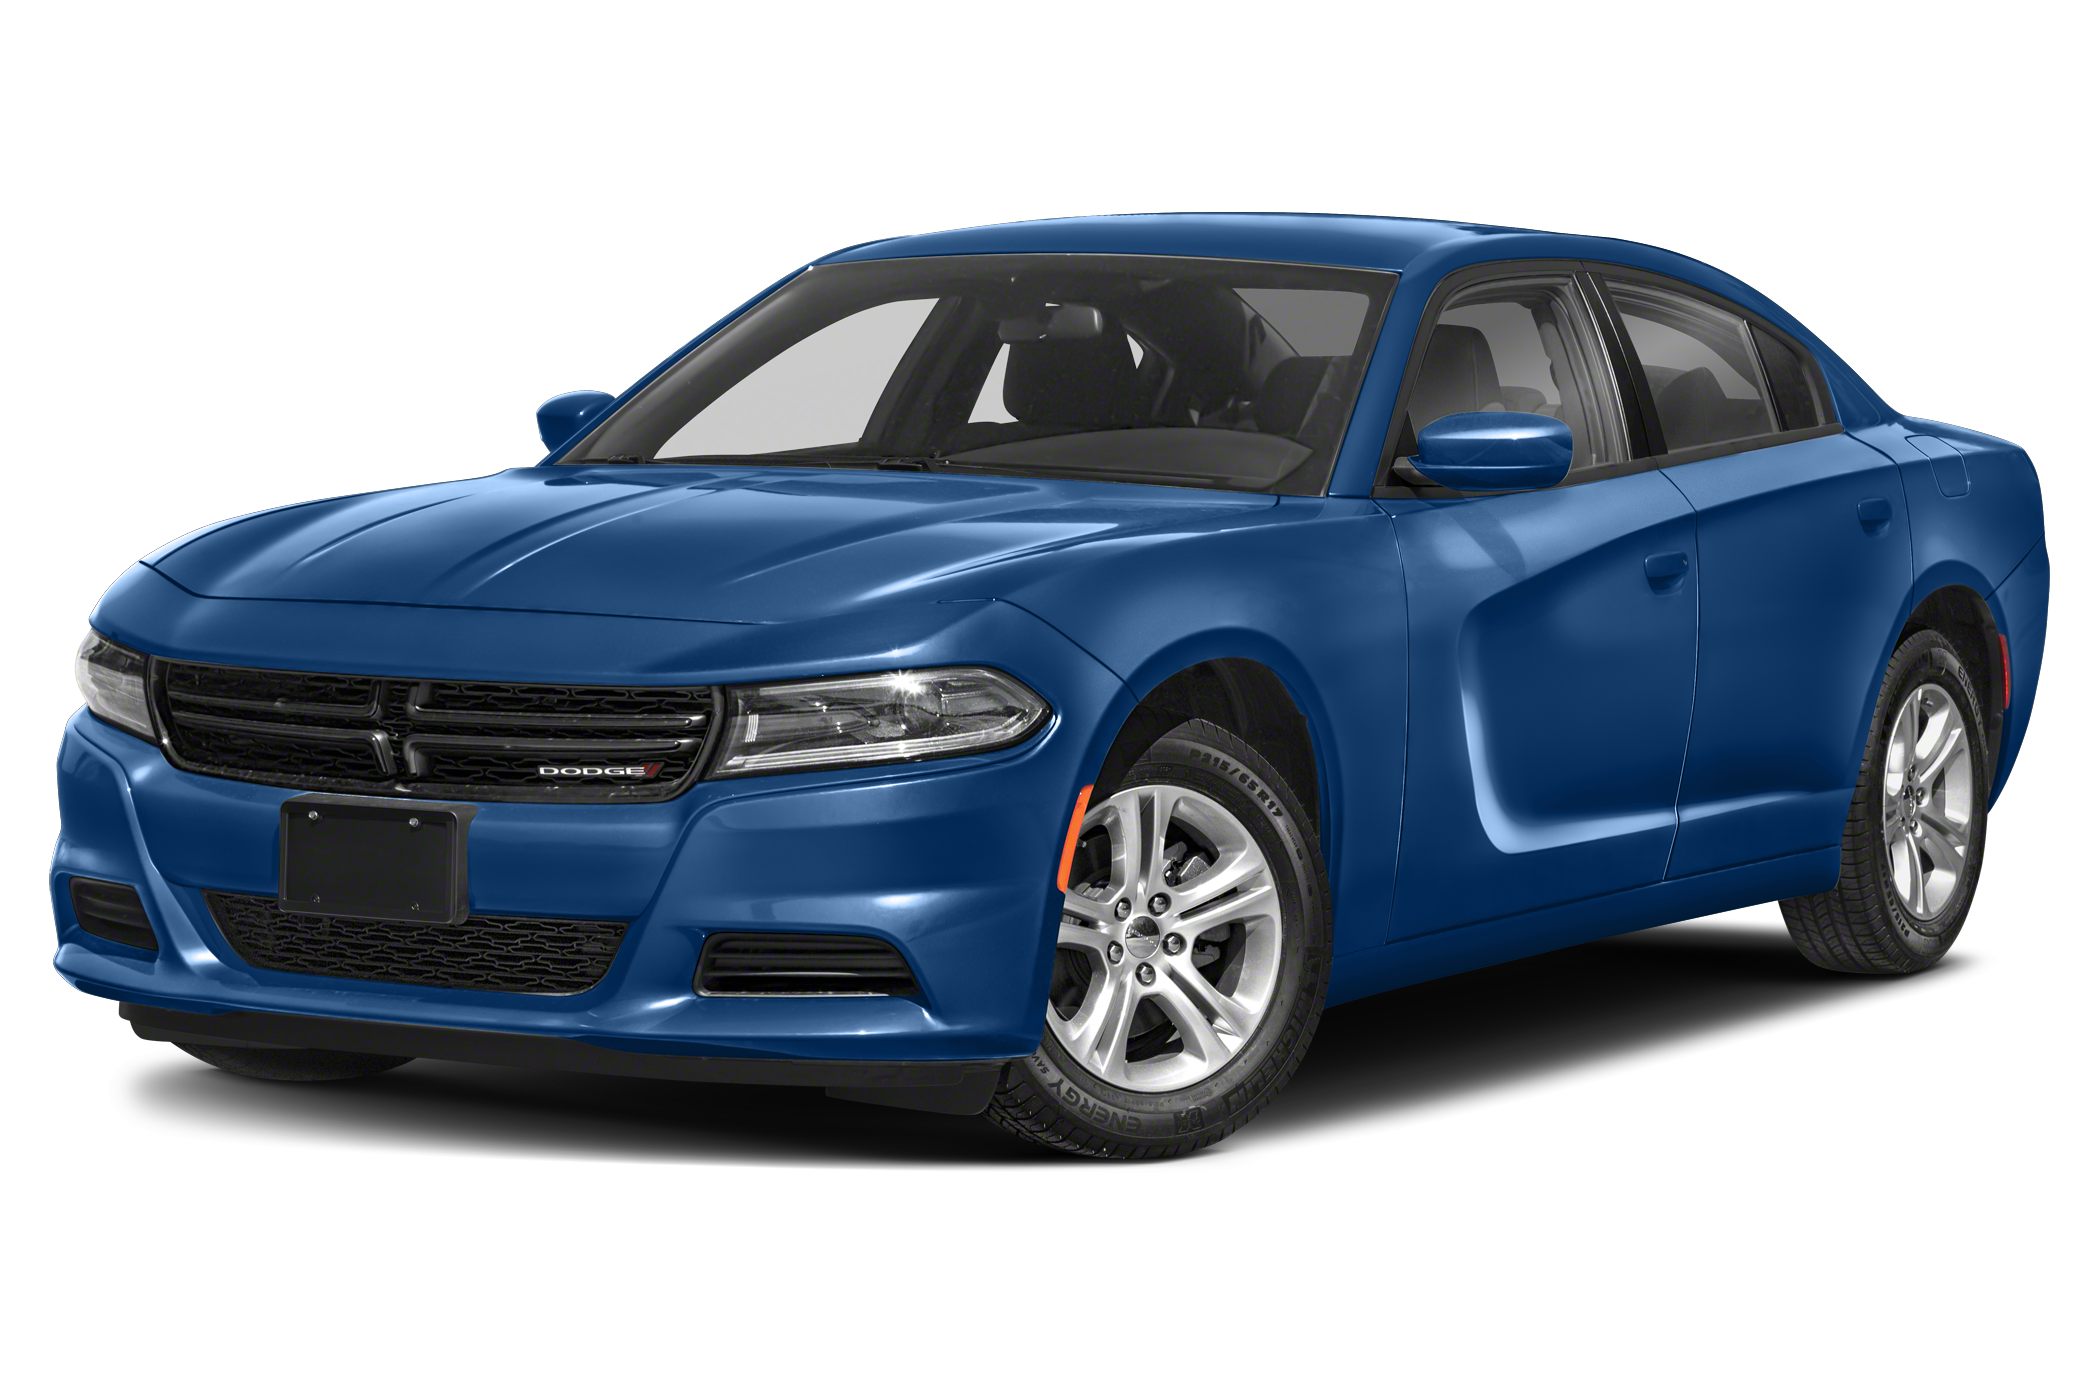 2012 Dodge Charger Blacktop Photo Gallery